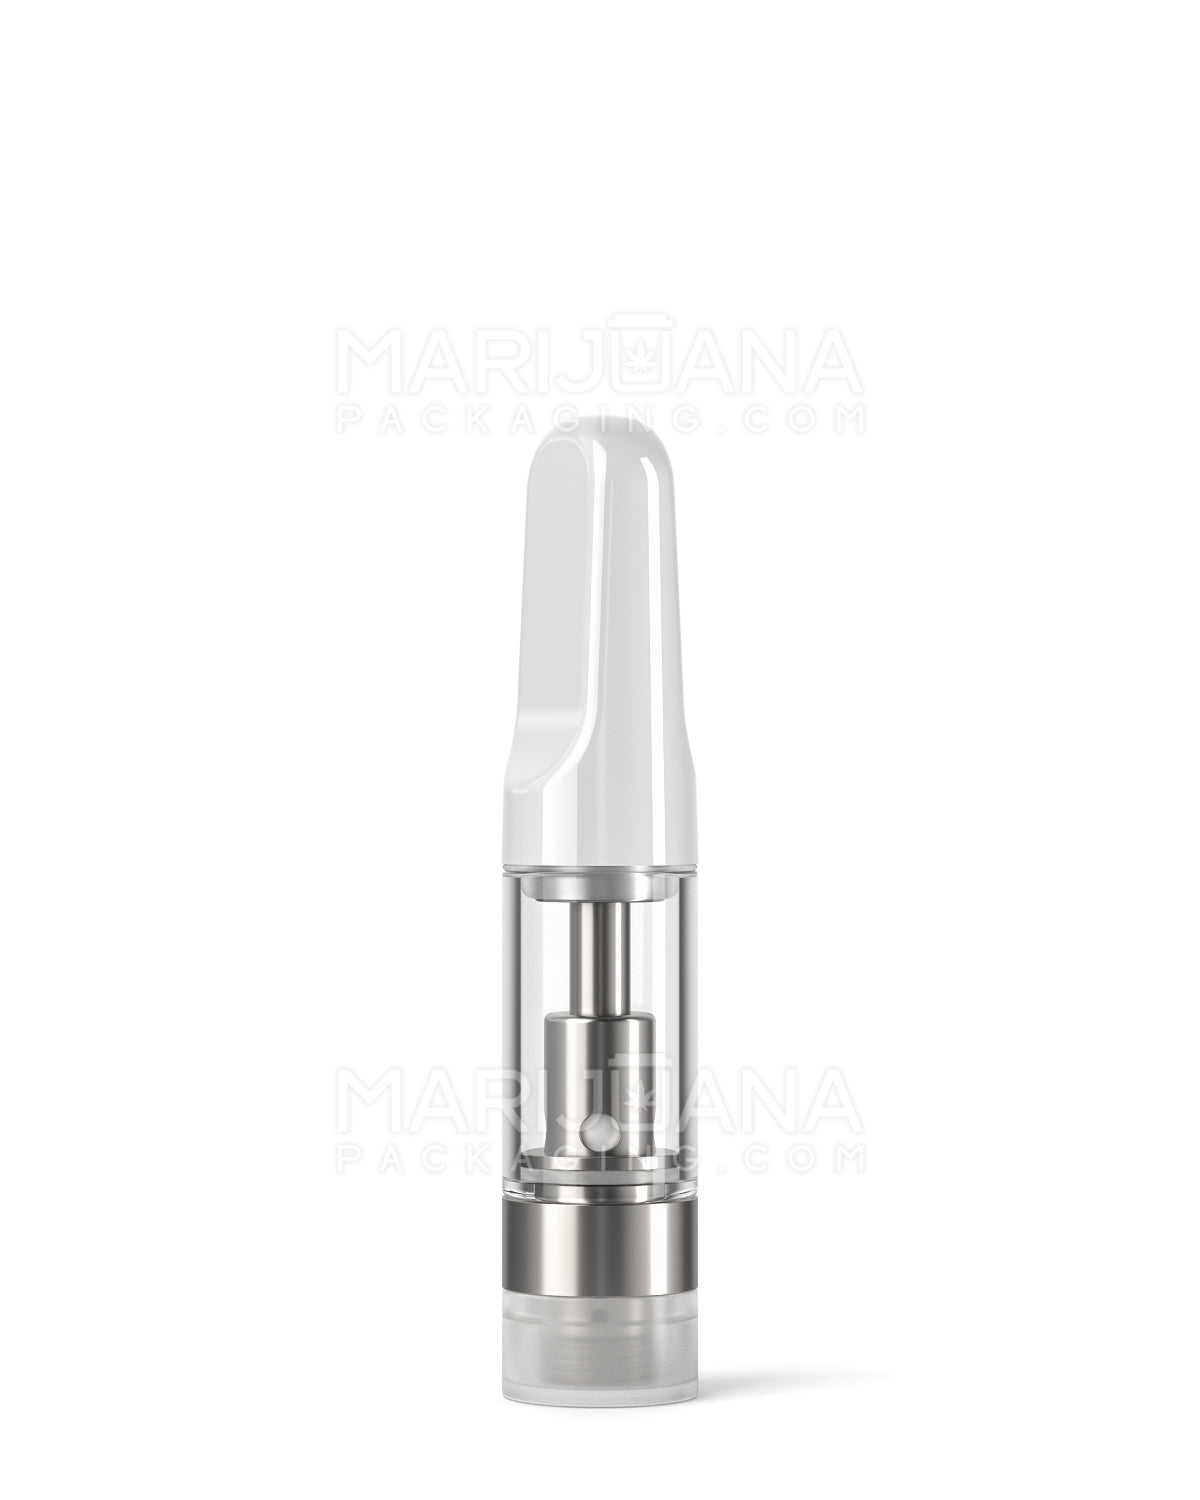 CCELL | Liquid6 Reactor Glass Vape Cartridge with White Ceramic Mouthpiece | 0.5mL - Screw On - 100 Count - 3